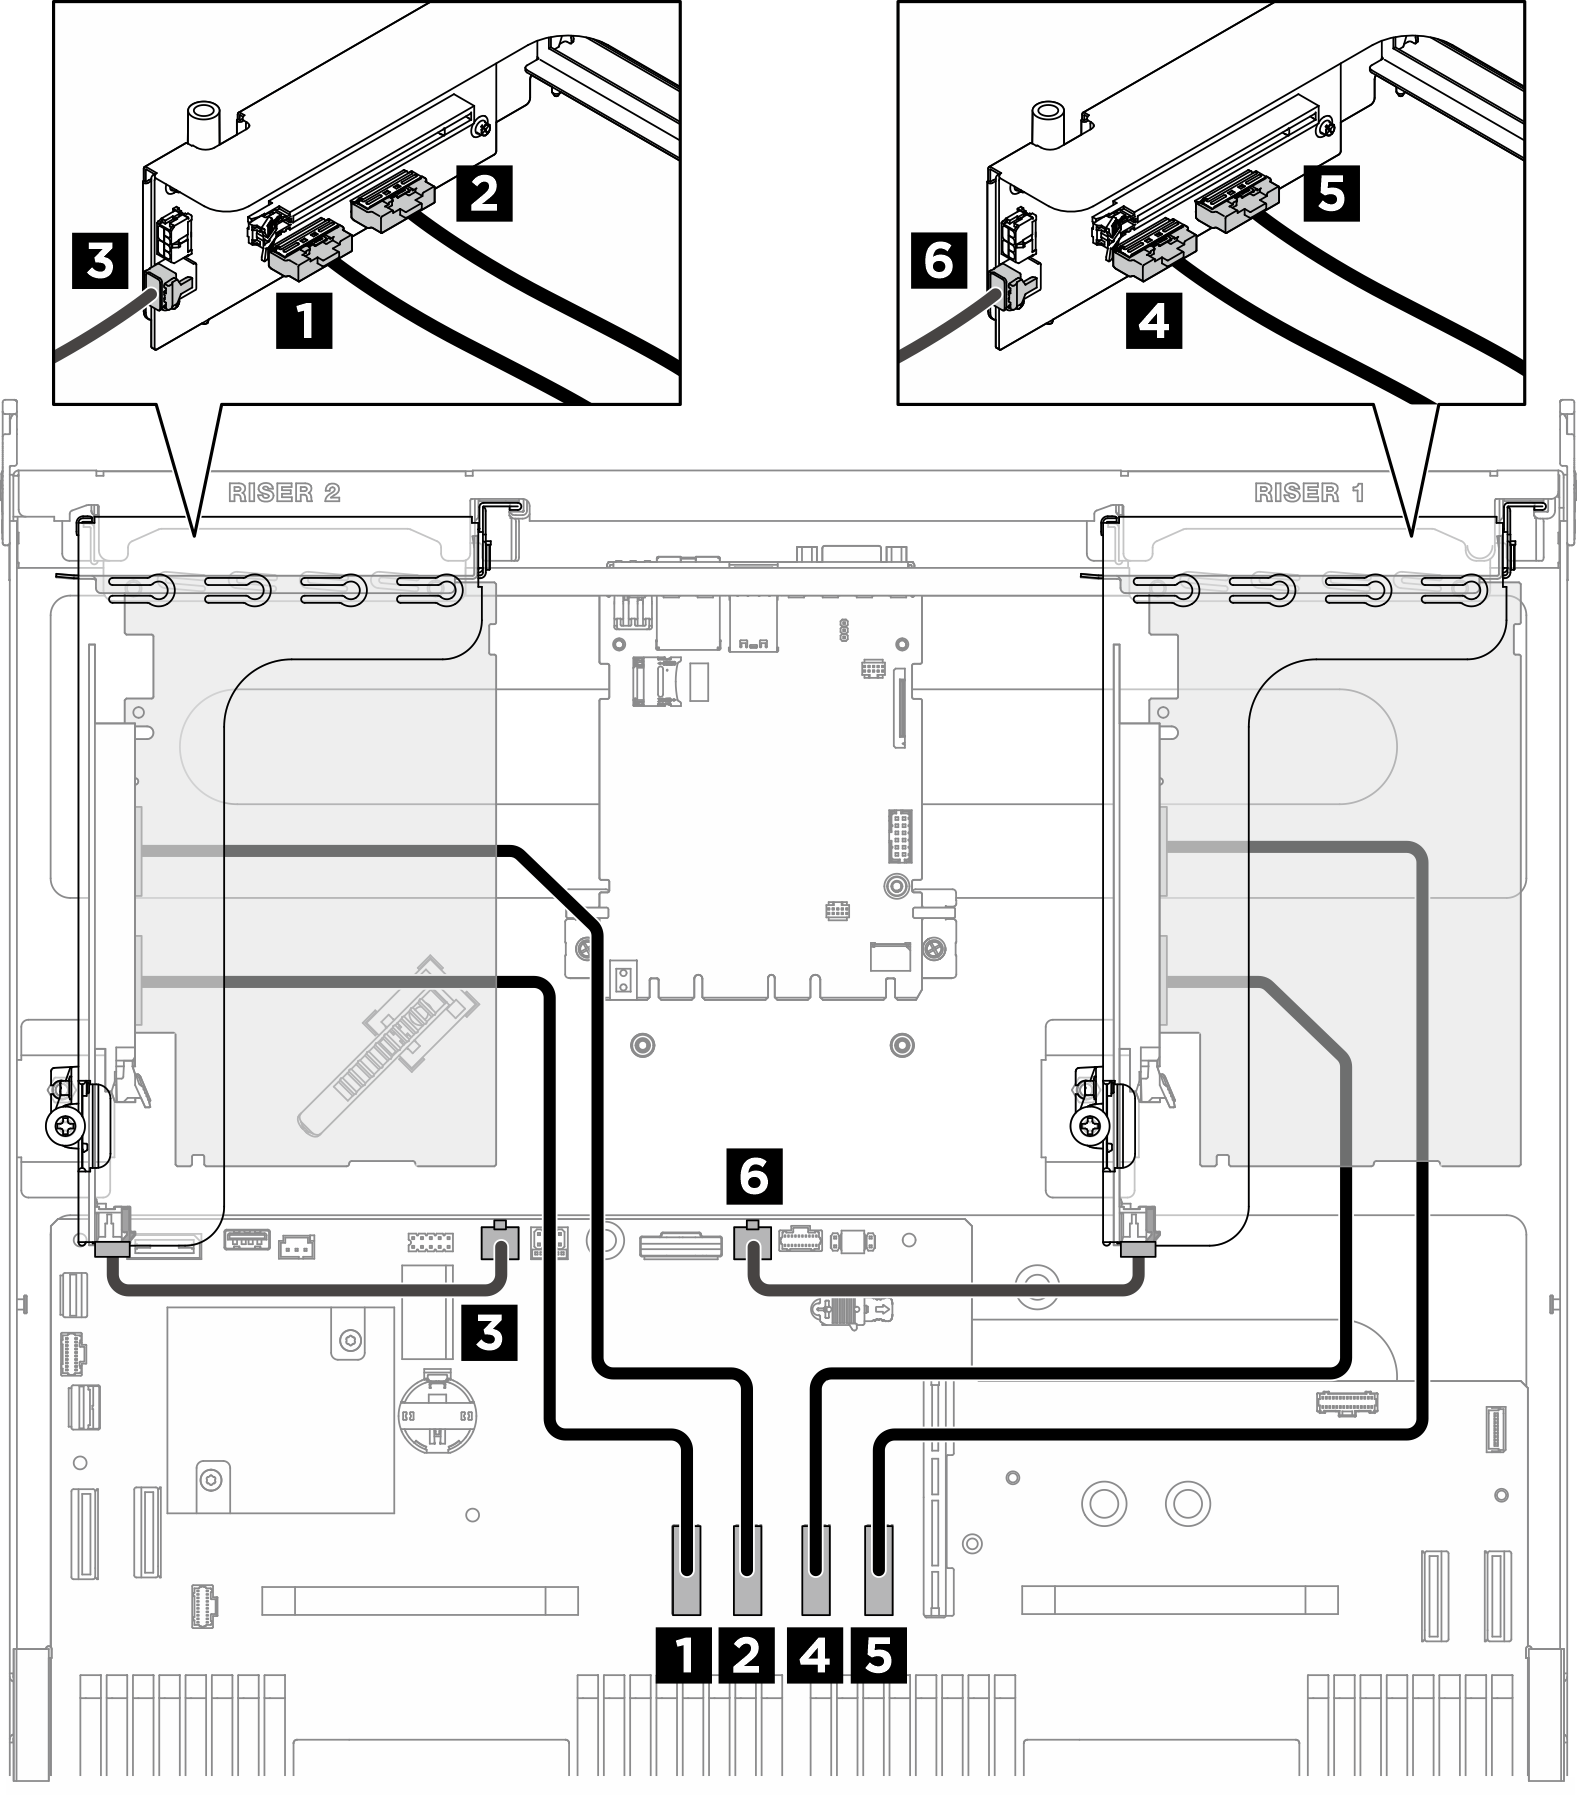 PCIe riser cable routing